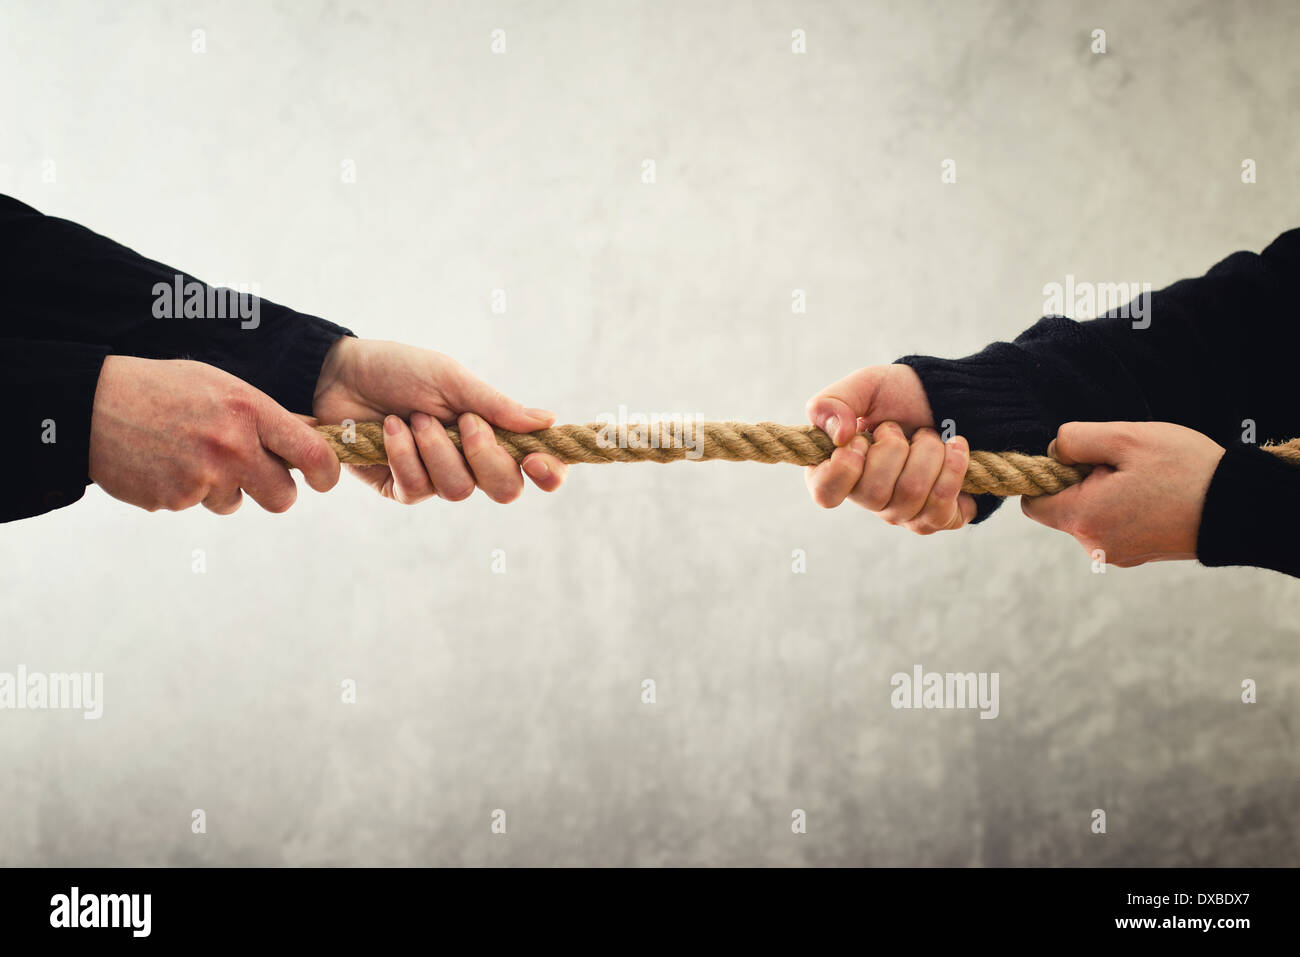 Tug of war. Female hands pulling rope to opposite sides. Rivalry concept. Stock Photo